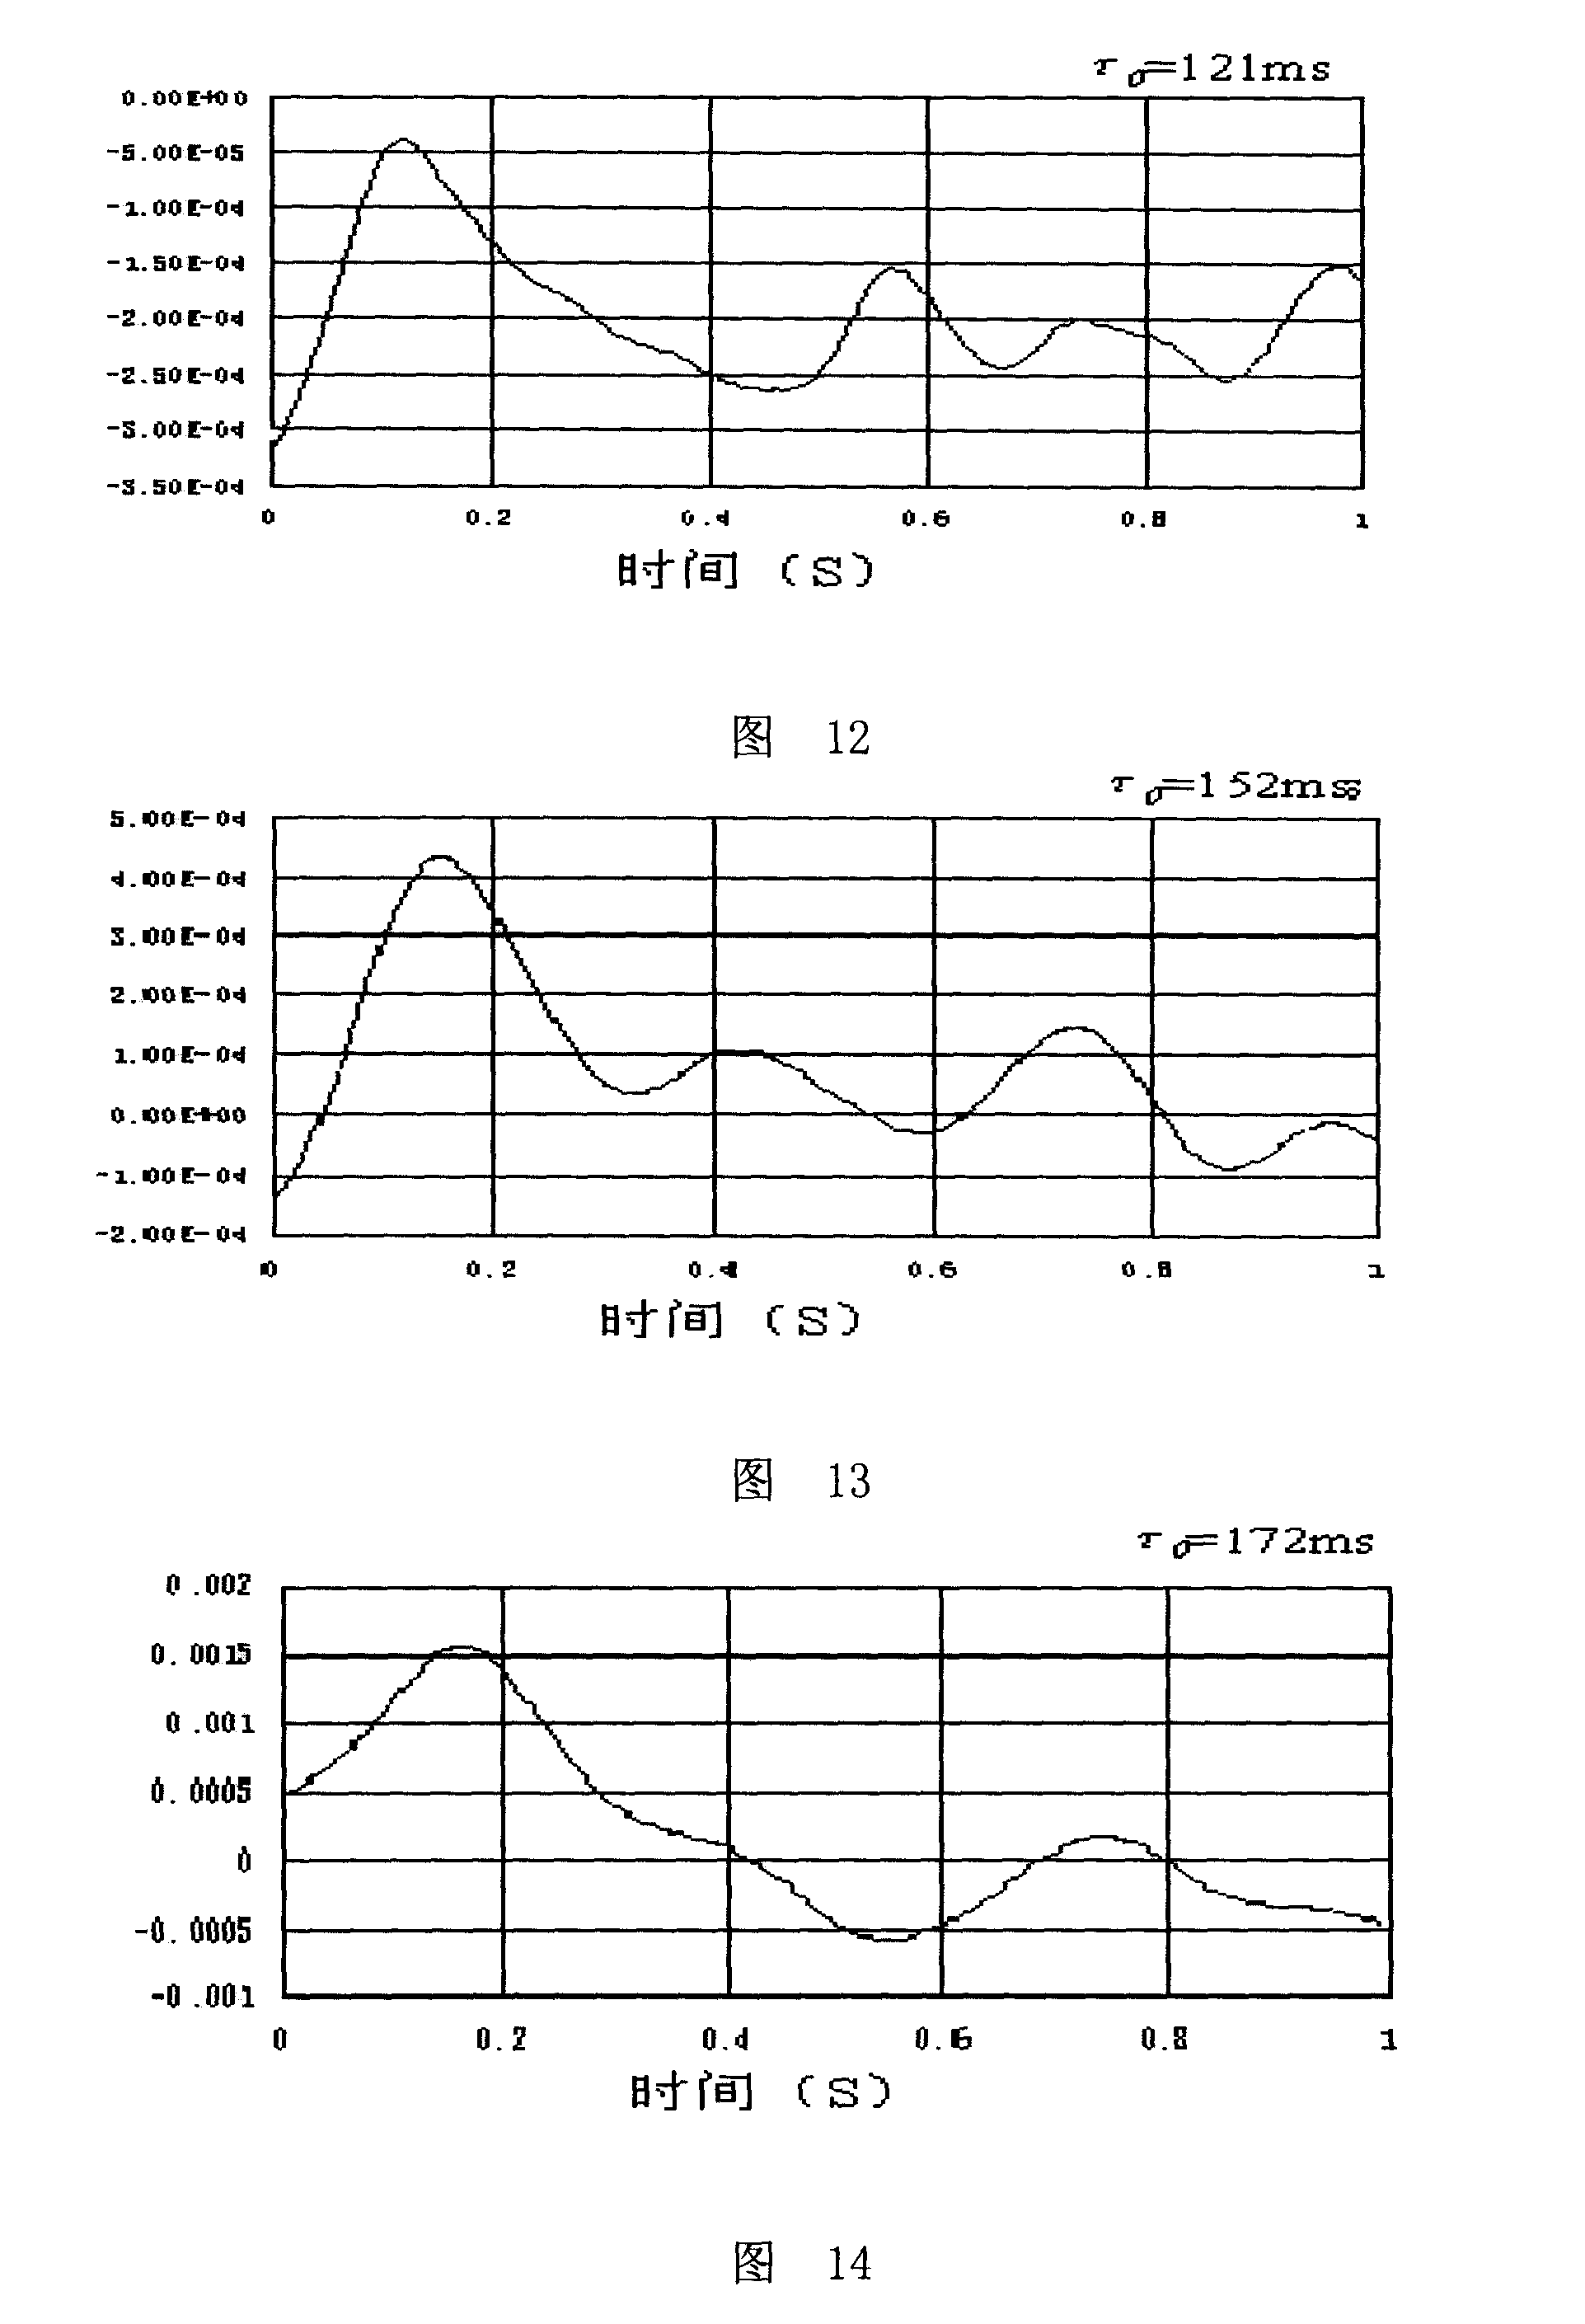 Conductance tracking correlation method for downflow well flow measurement